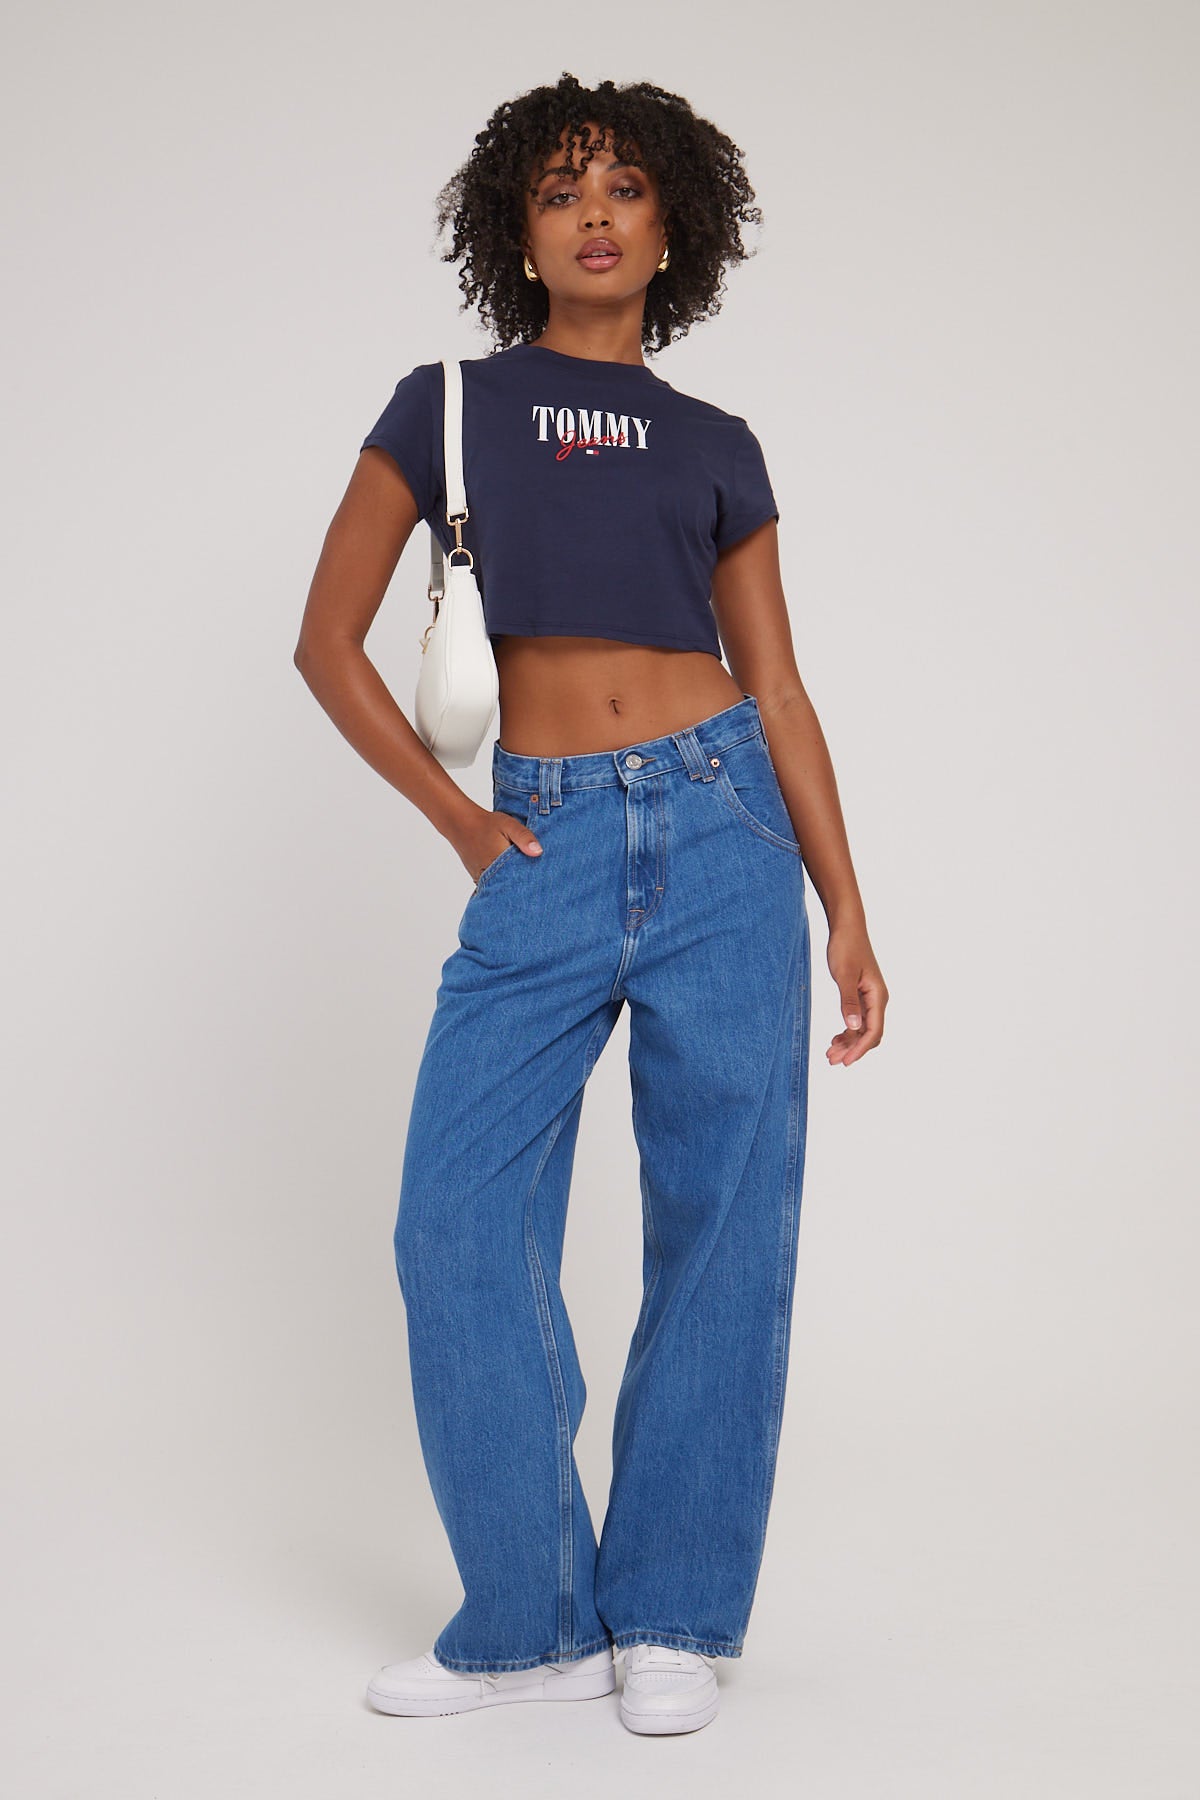 Tommy Jeans Baby Crop Essential Logo Tee Twilight Navy